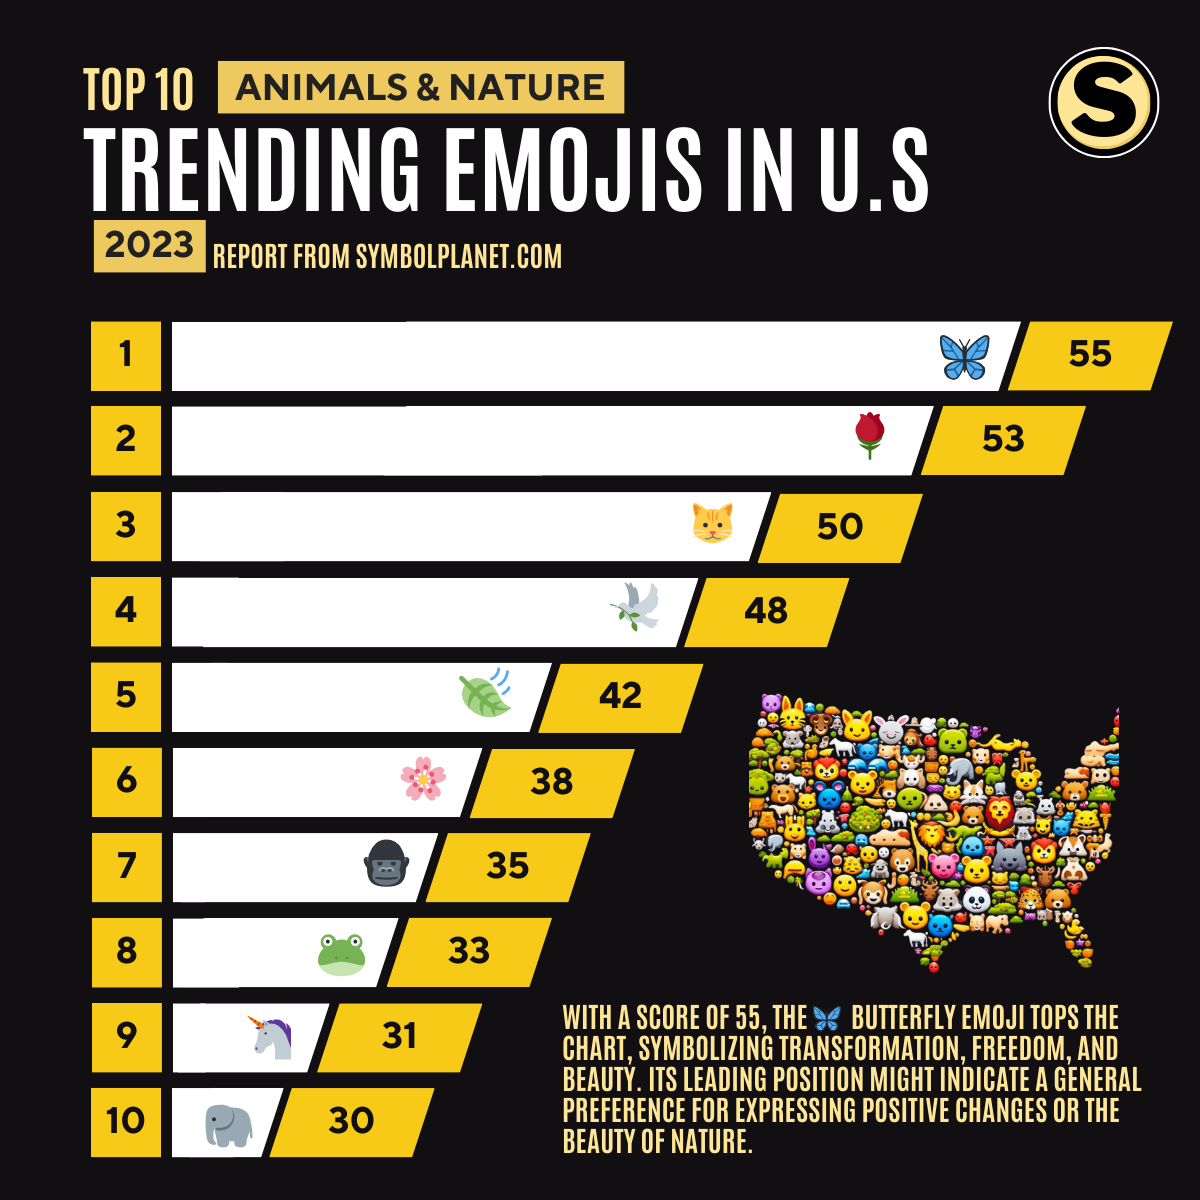 Top 10 Trending (Animals & Nature) Emojis of 2023 in the United States